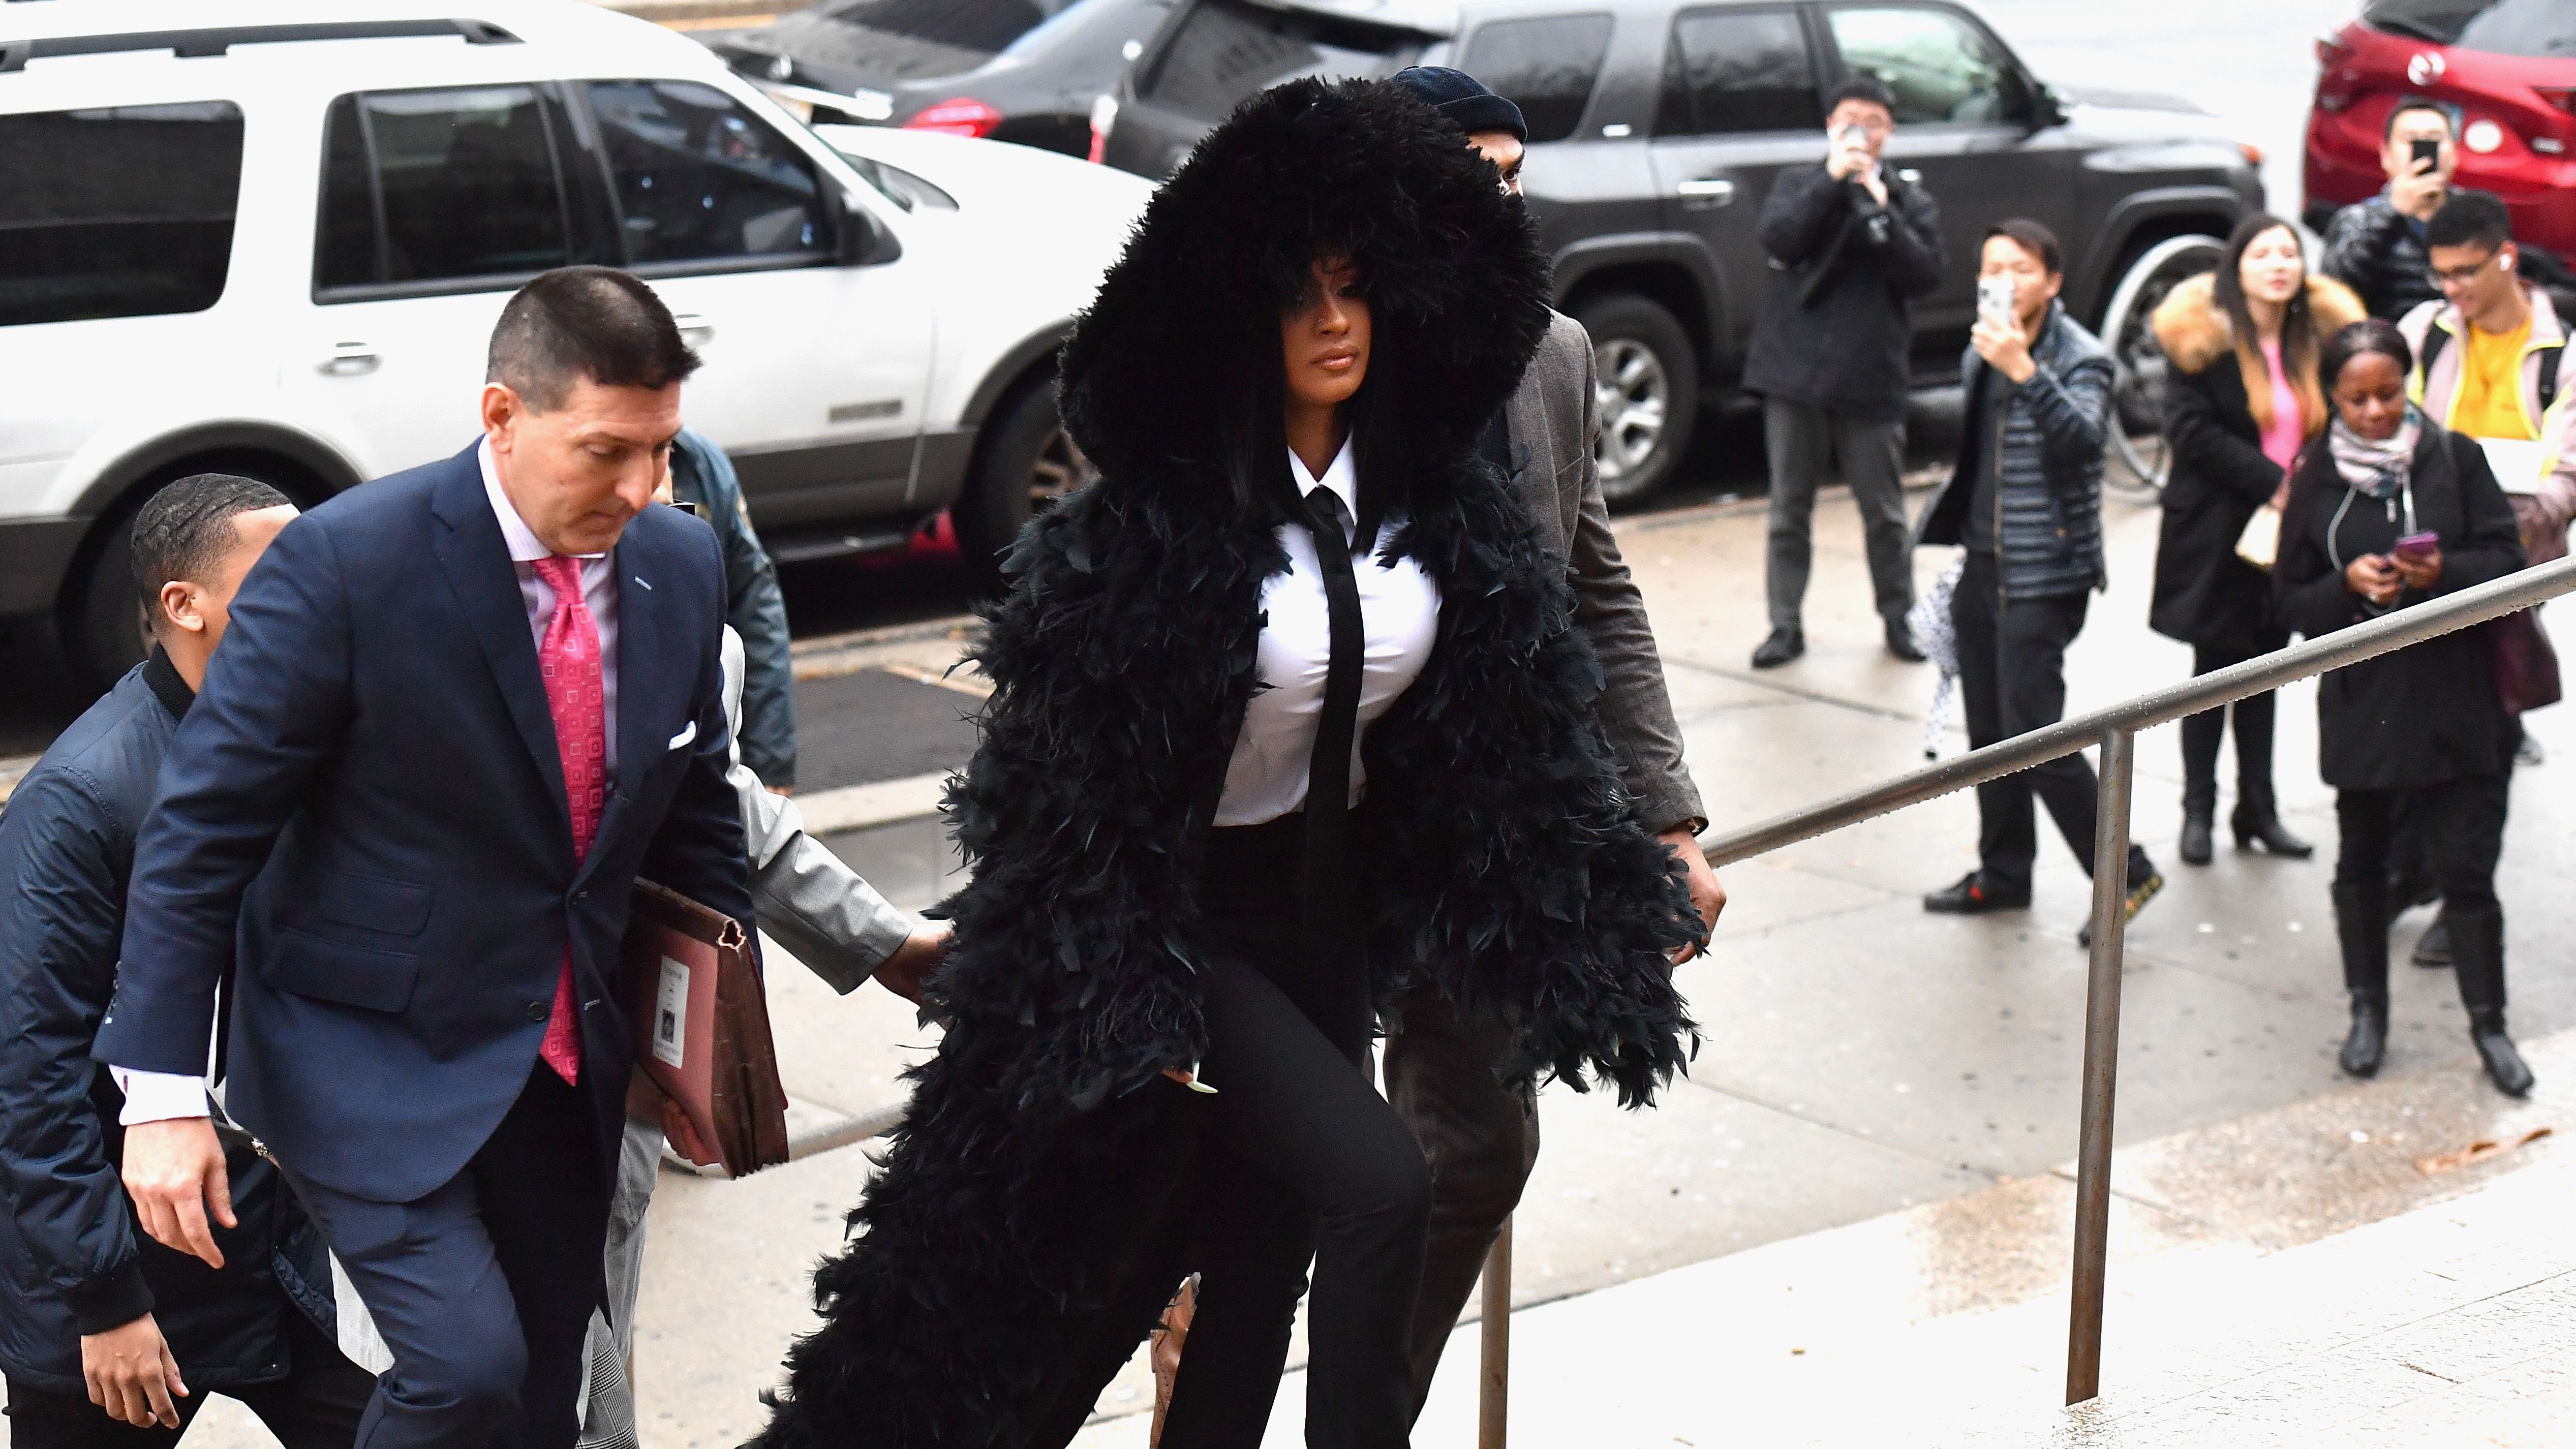 Cardi B. Wears Black Feathered Coat and Spiky Heels to Court